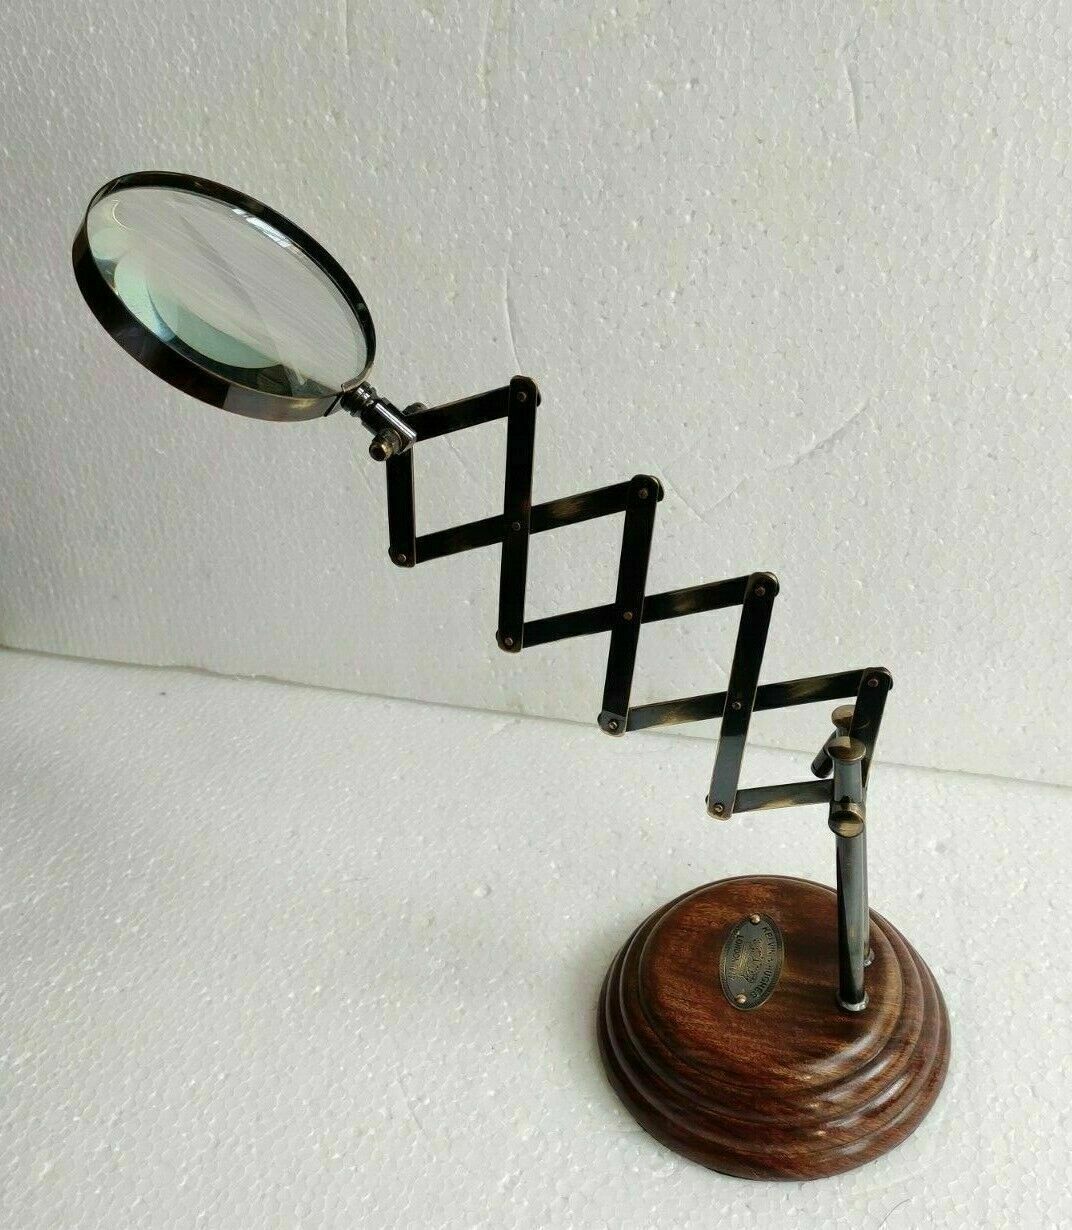 Vintage Magnifier Brass Magnifying Glass on Wooden Style Desktop Tabletop Stand